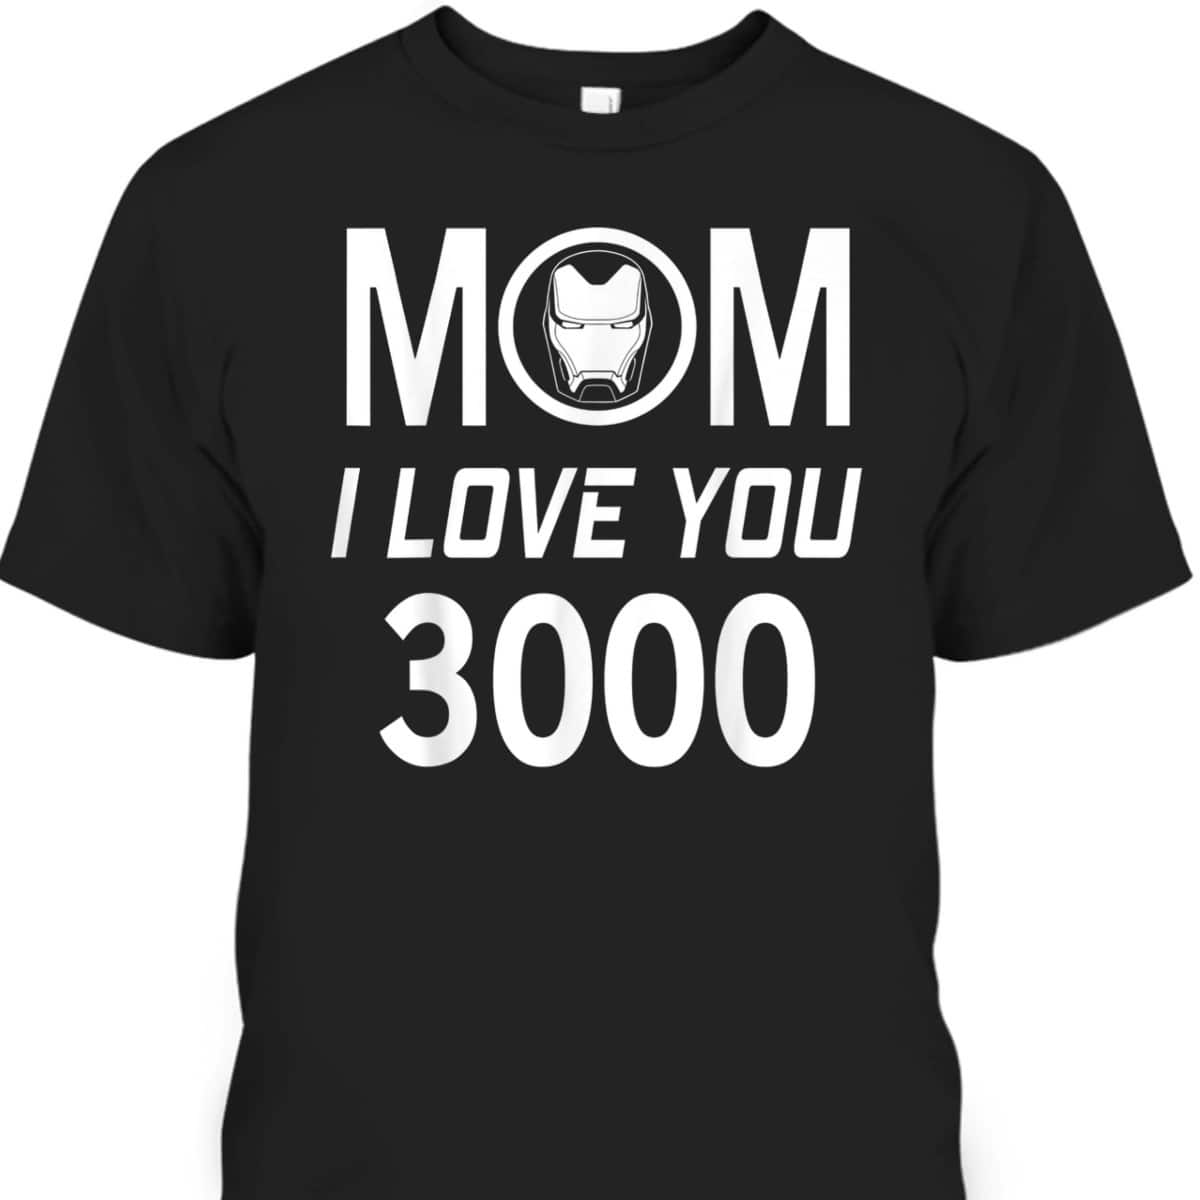 Mother's Day T-Shirt Marvel Iron Man Mom I Love You 3000